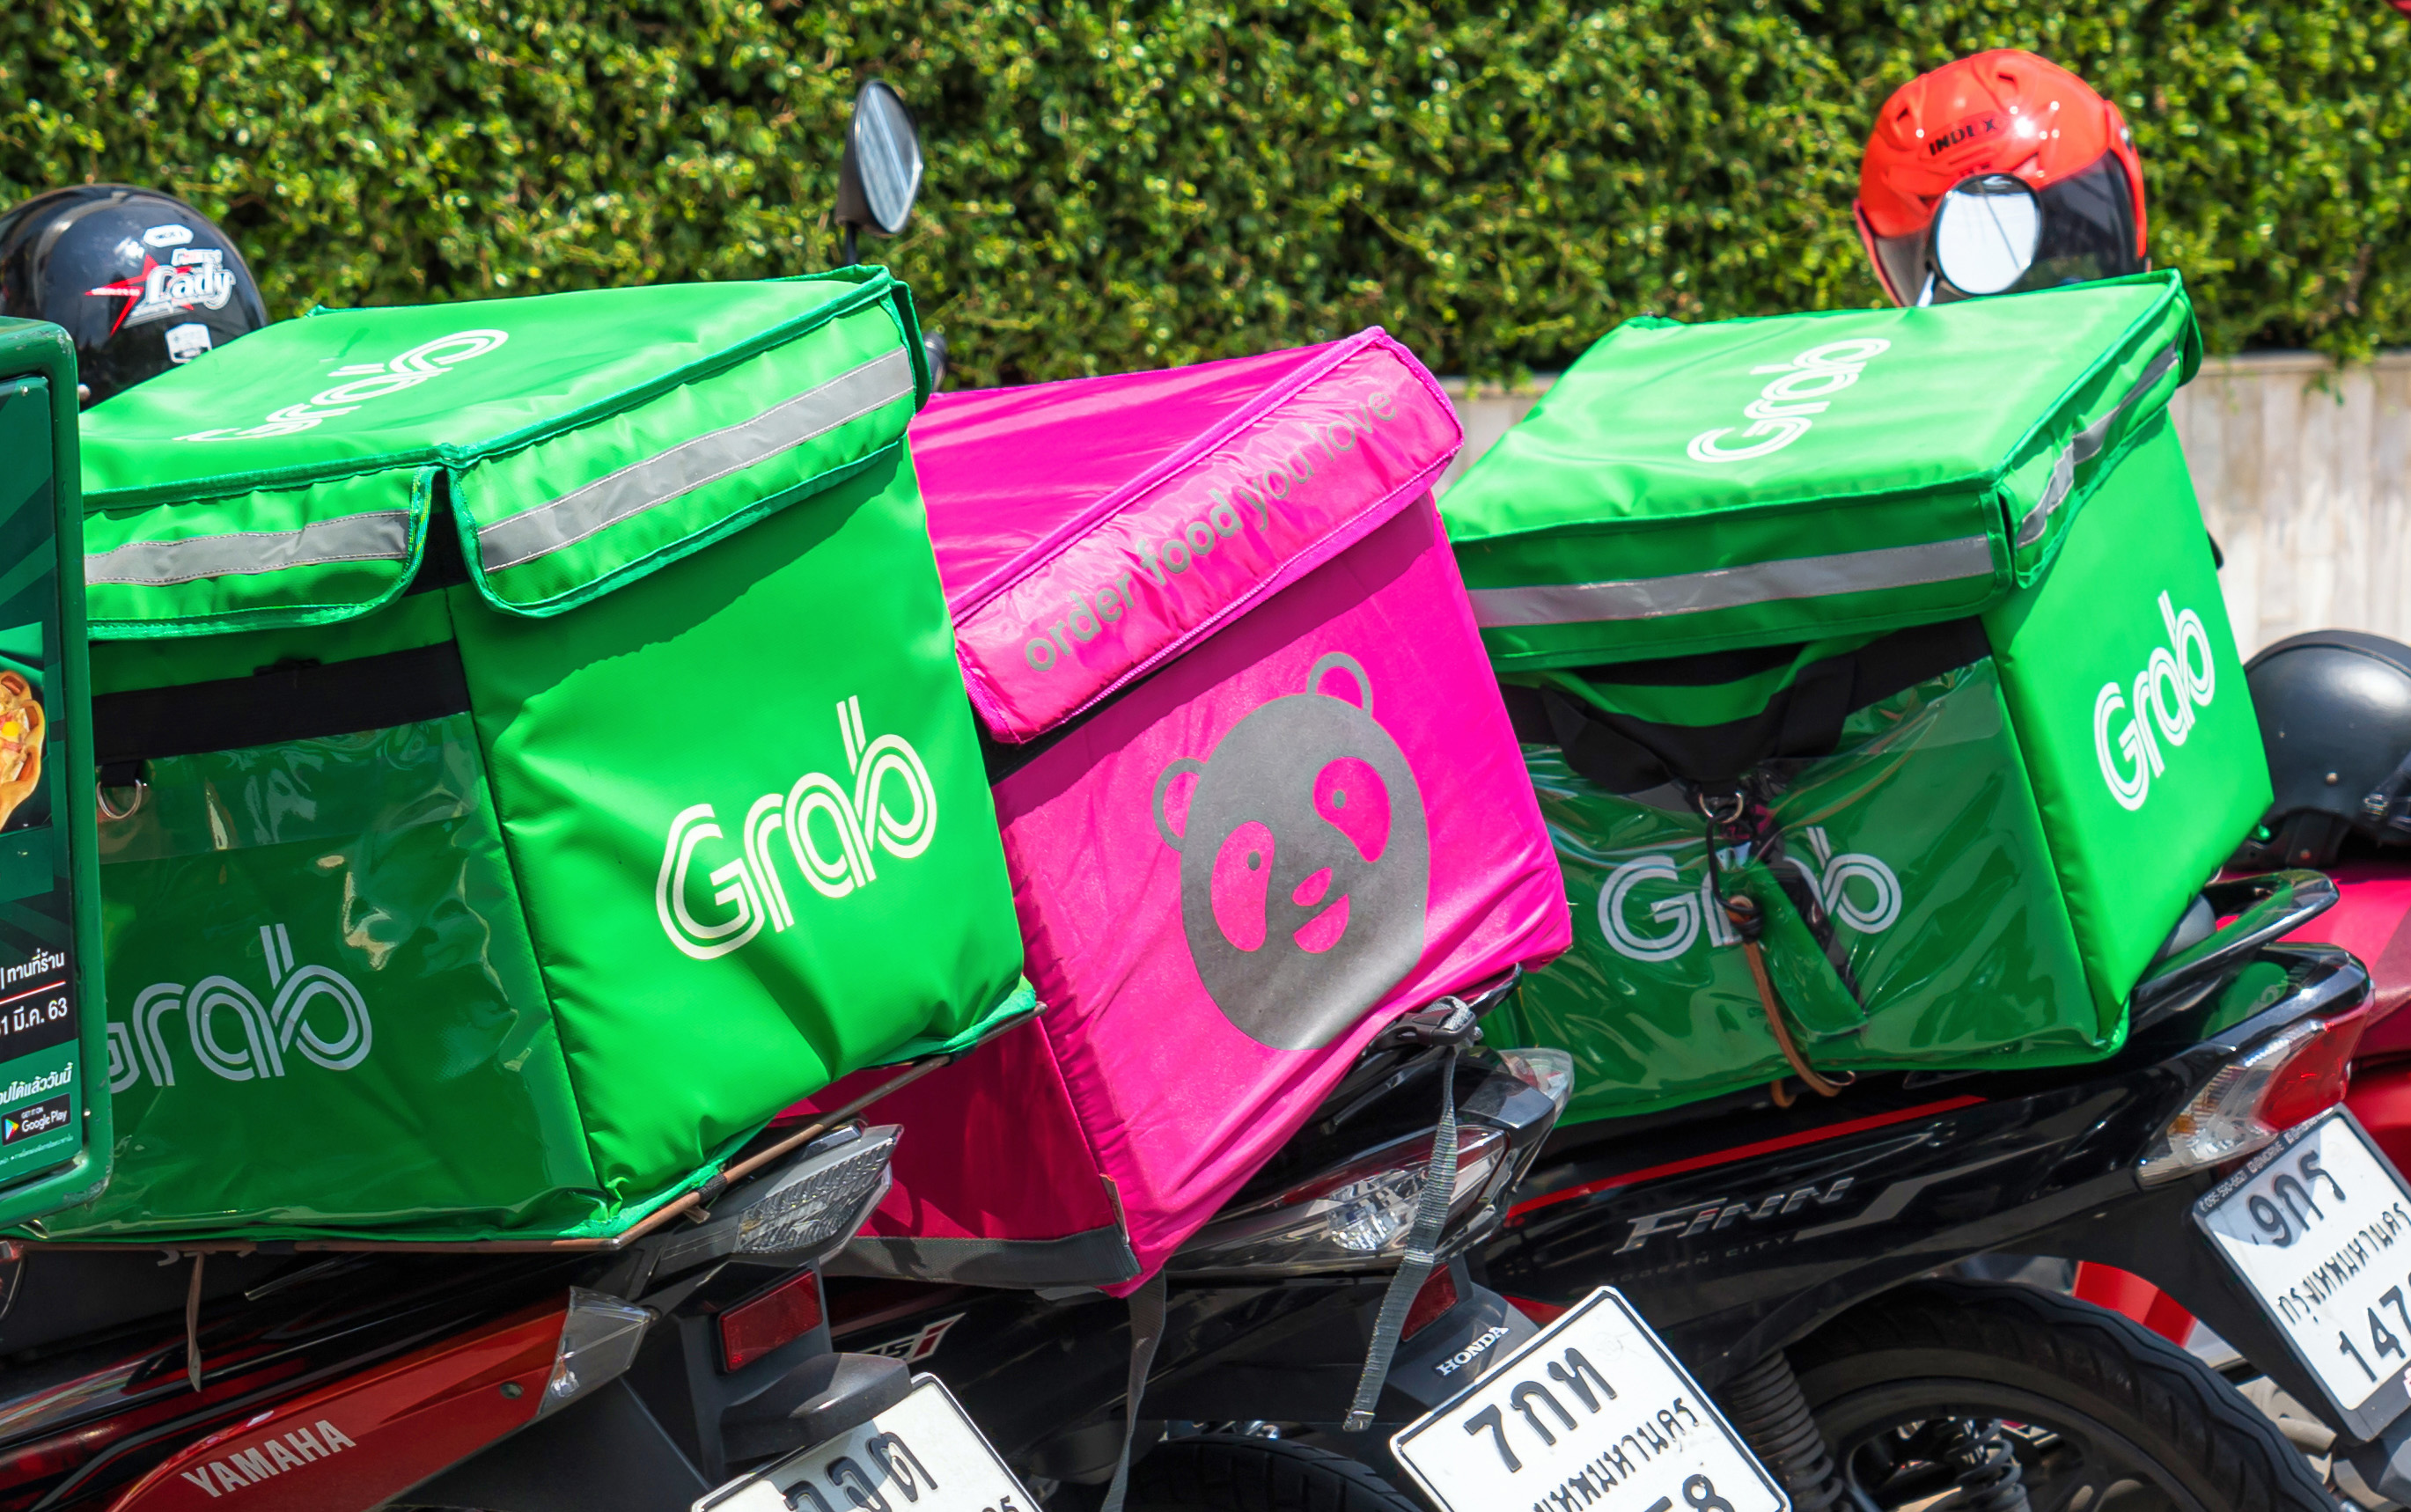 Grab might acquire foodpanda’s Asian operations for S$1.5 billion, according to German report